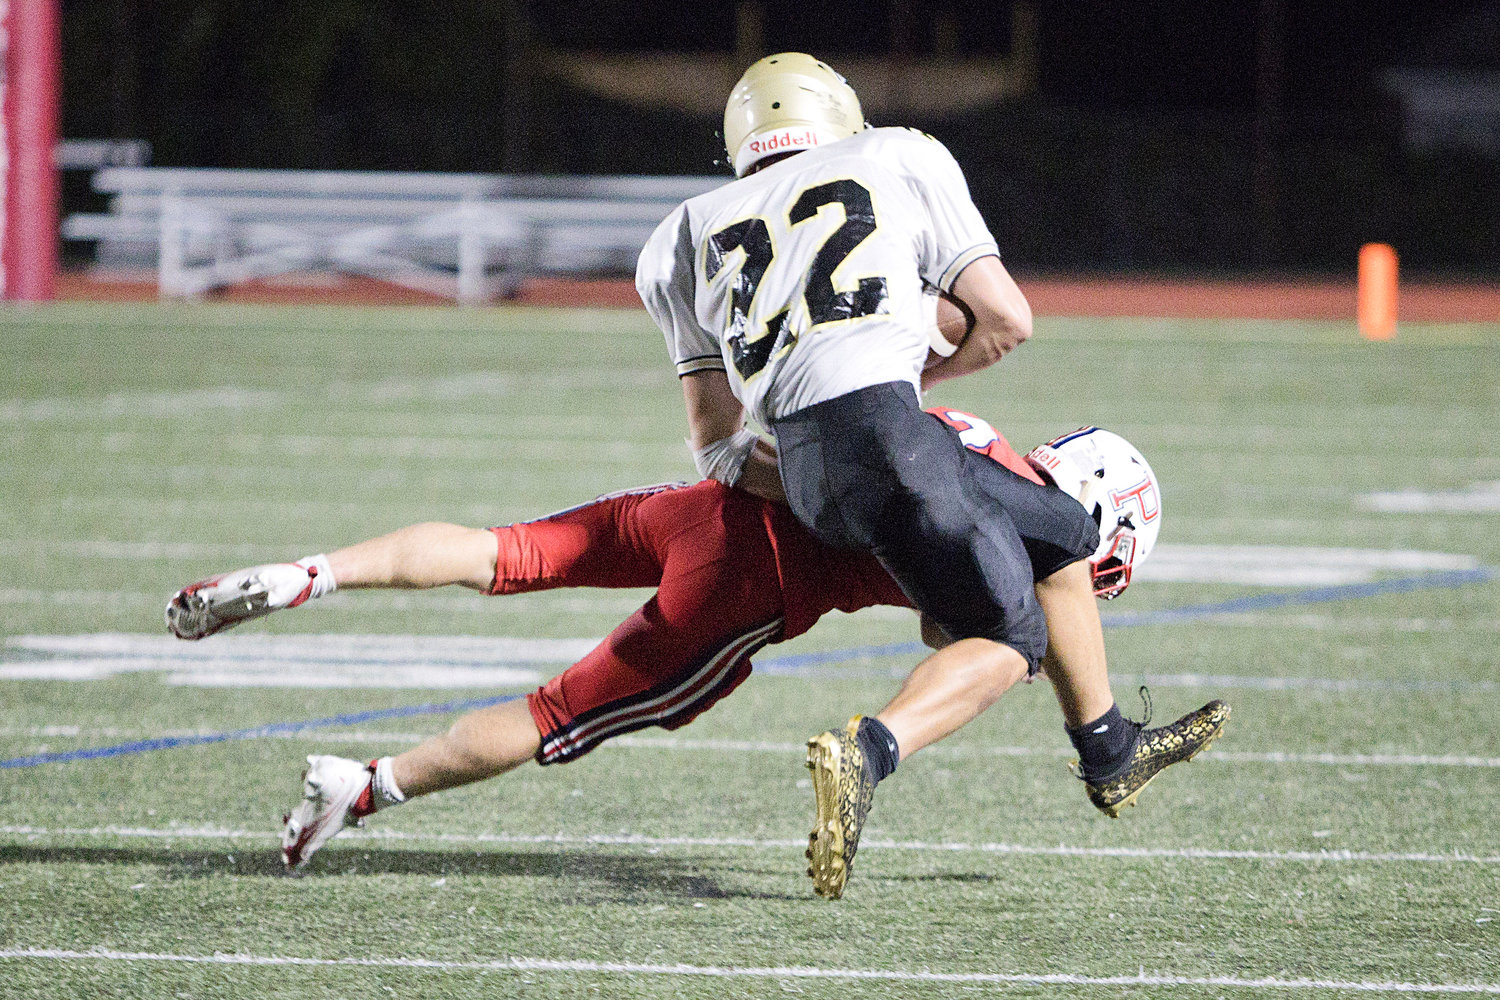 John Voute blocks a North Kingstown ball-carrier during the second half of Friday's home opener.